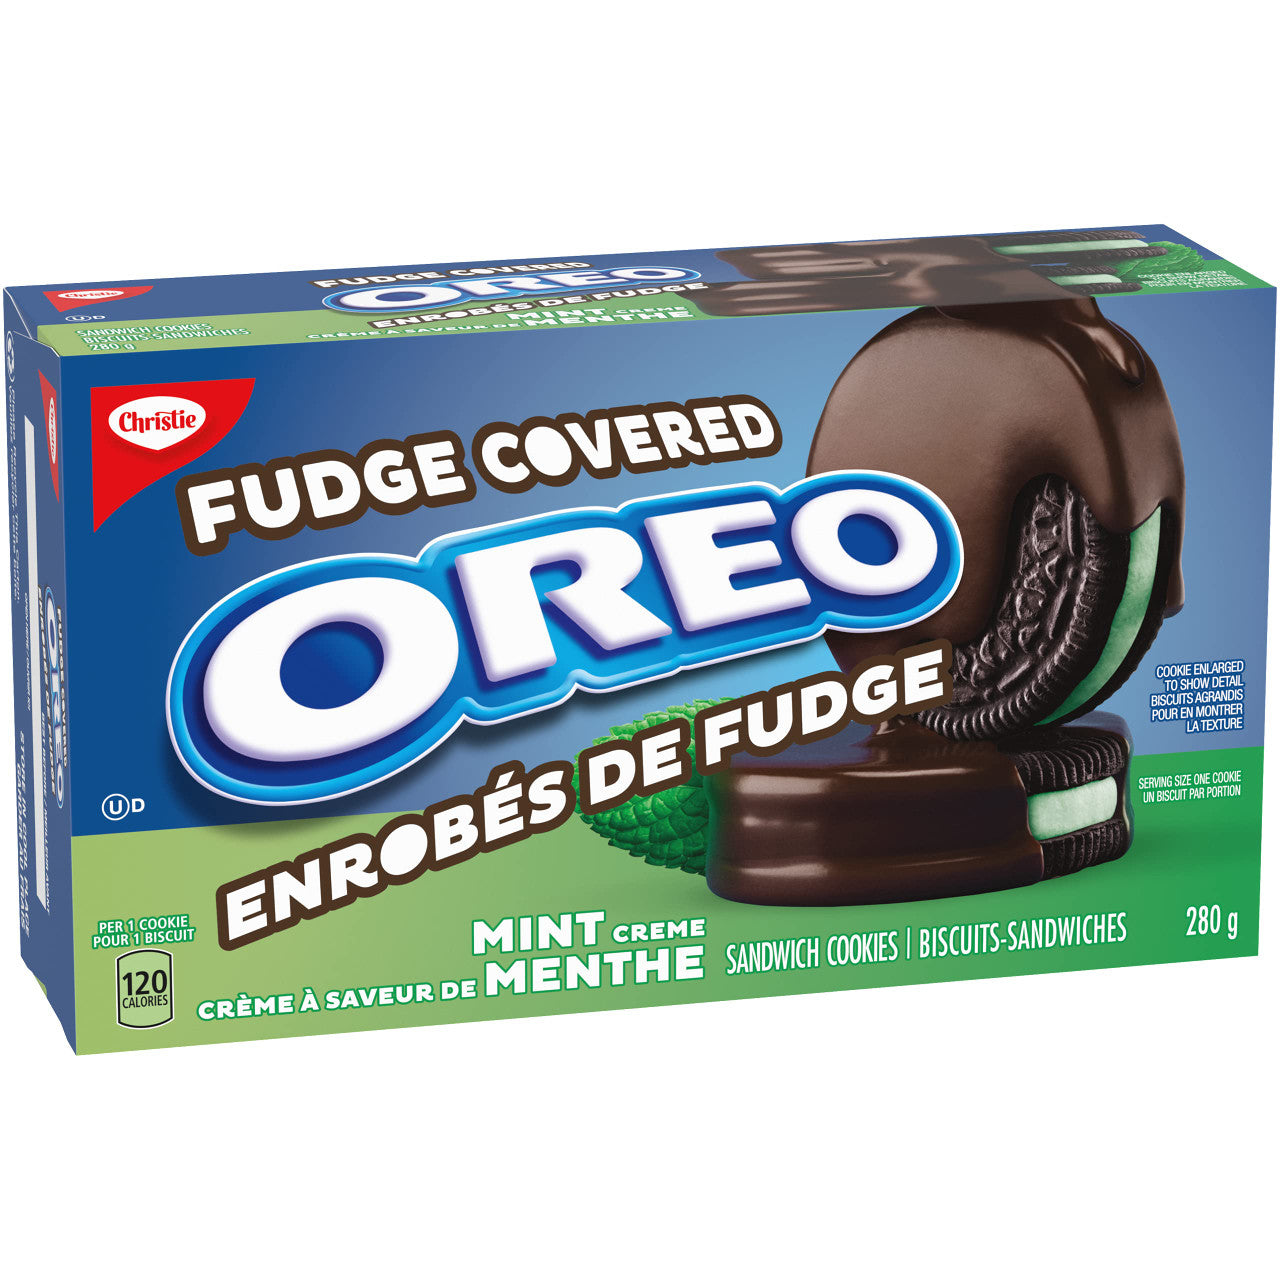 Christie Oreo Mint Chocolate Fudge Covered Cookies, 280g/9.9oz., Bag, (Imported from Canada)